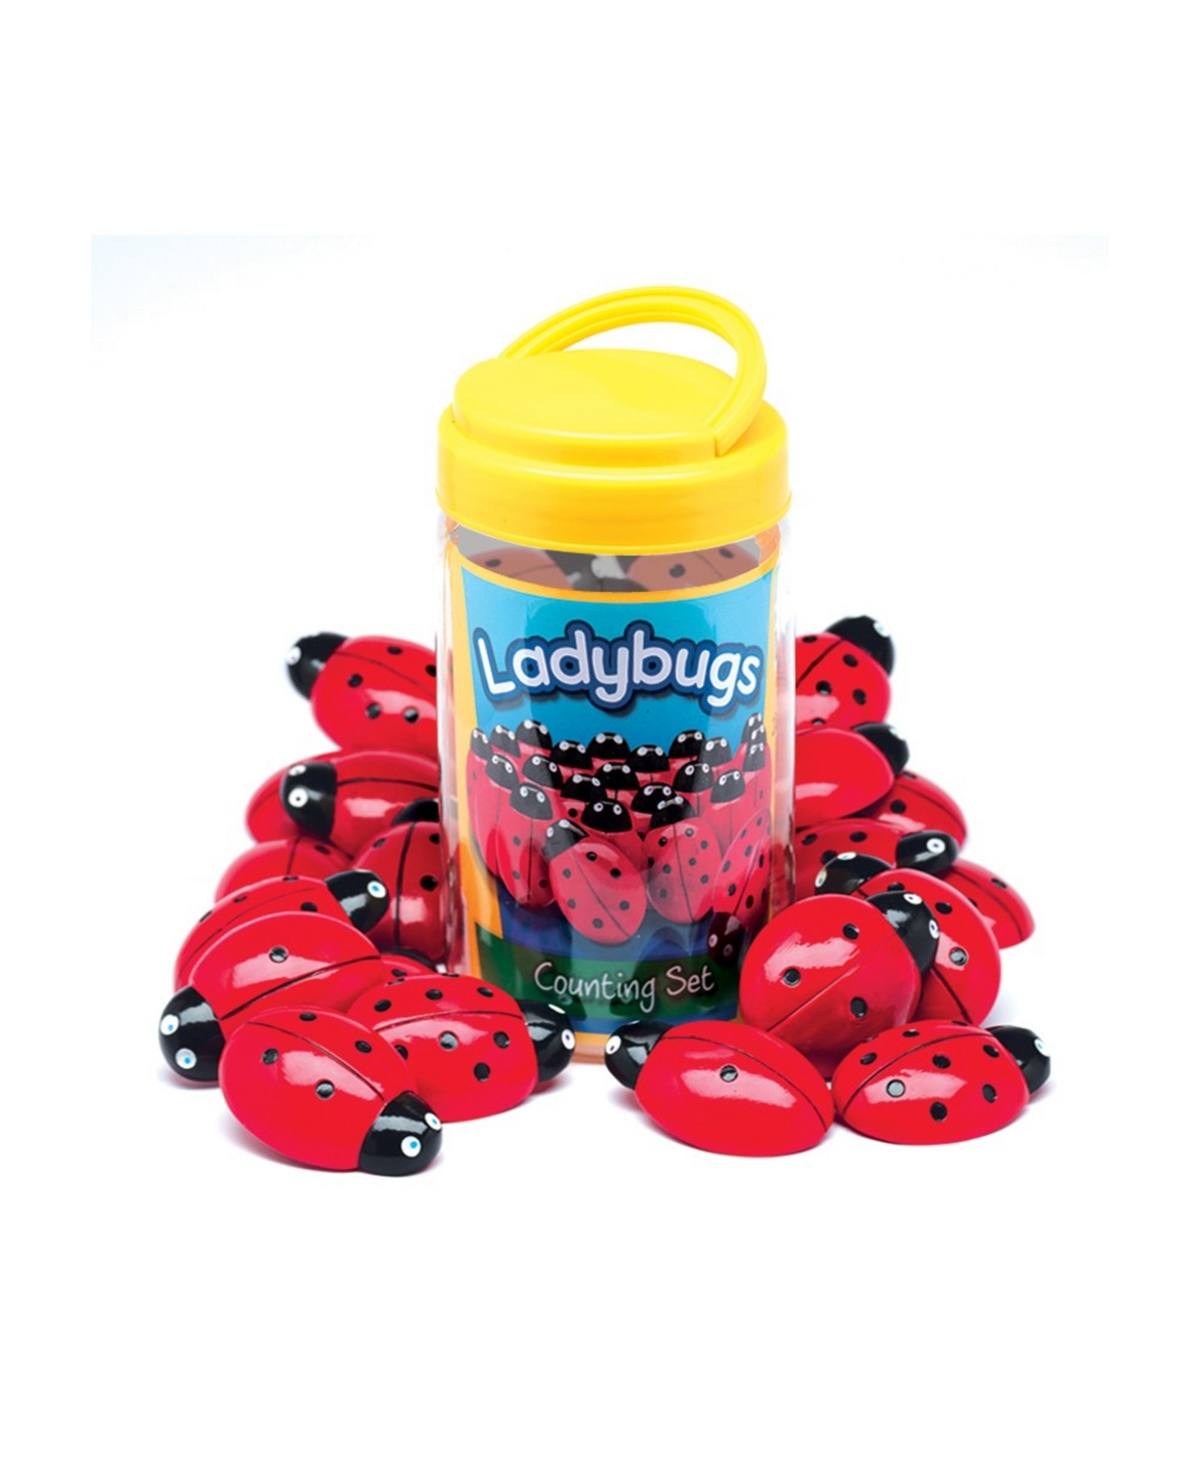 Yellow Door Ladybugs Counting Set, Pack Of 22 In Red